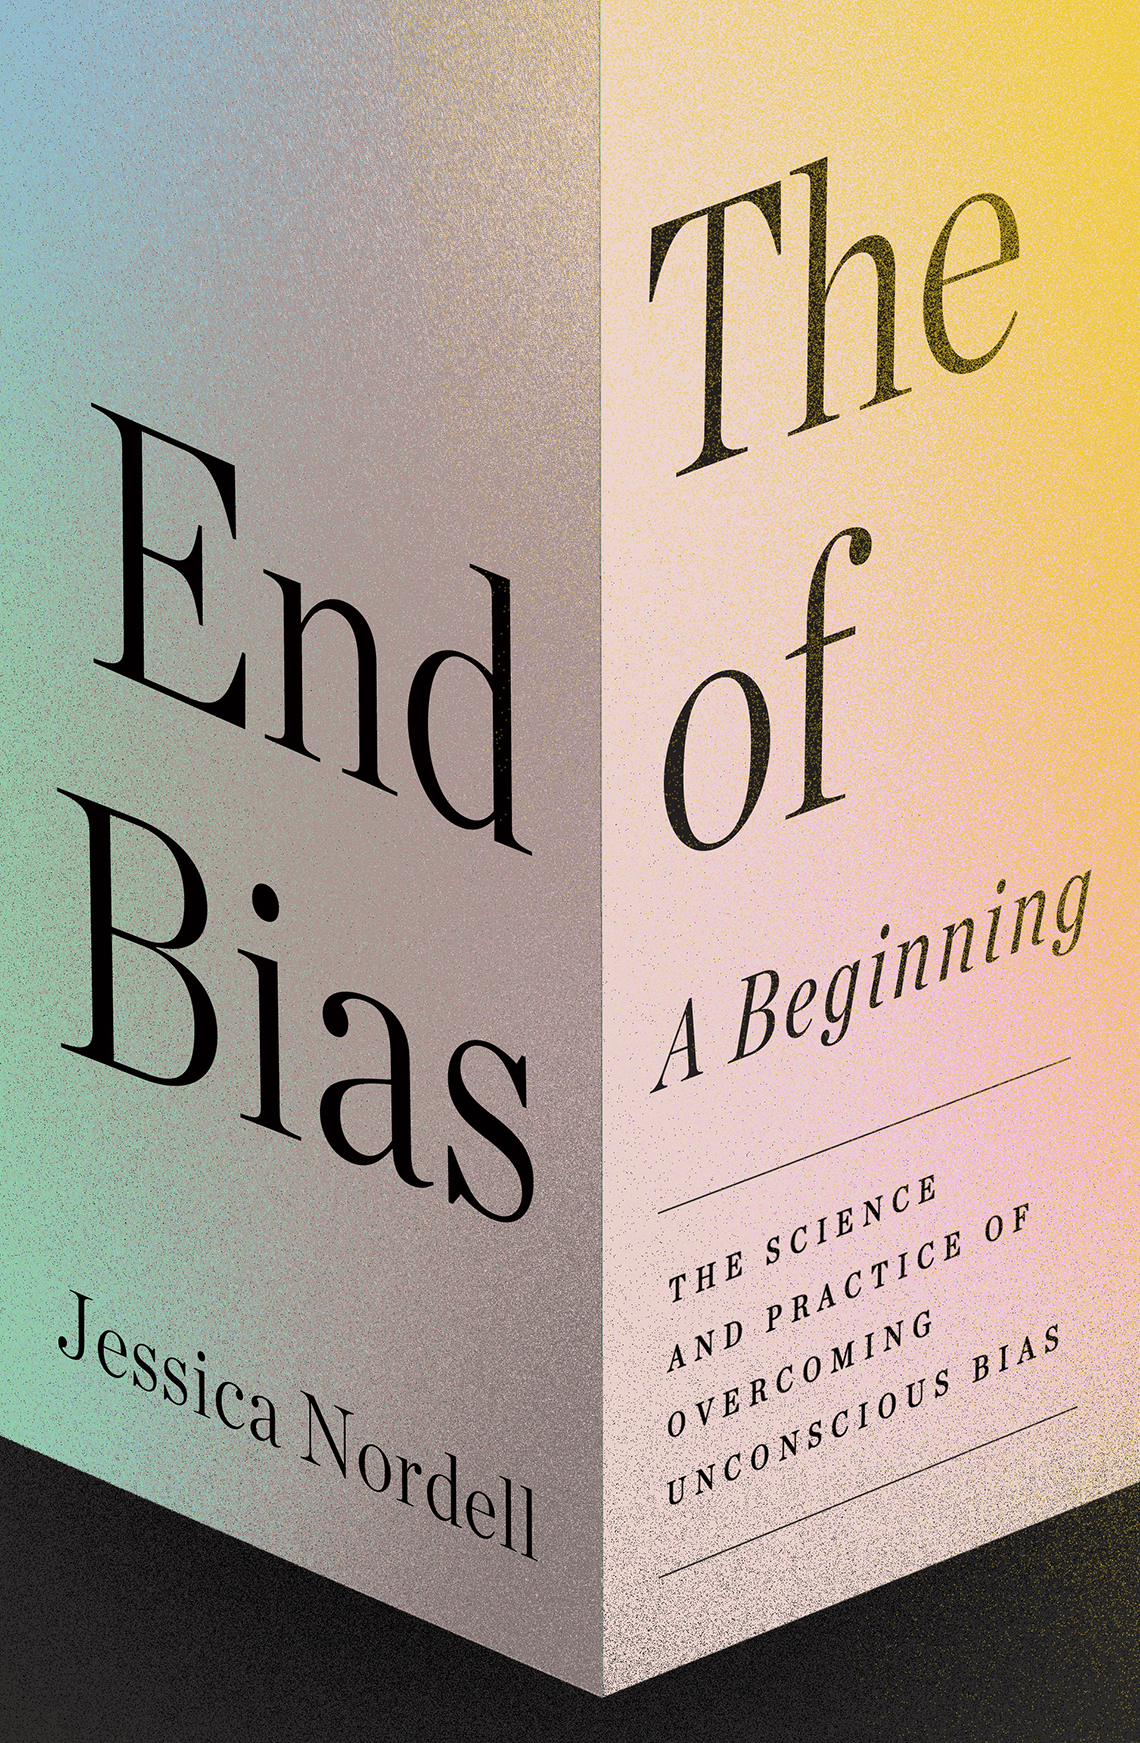 the end of bias a beginning by jessica nordell